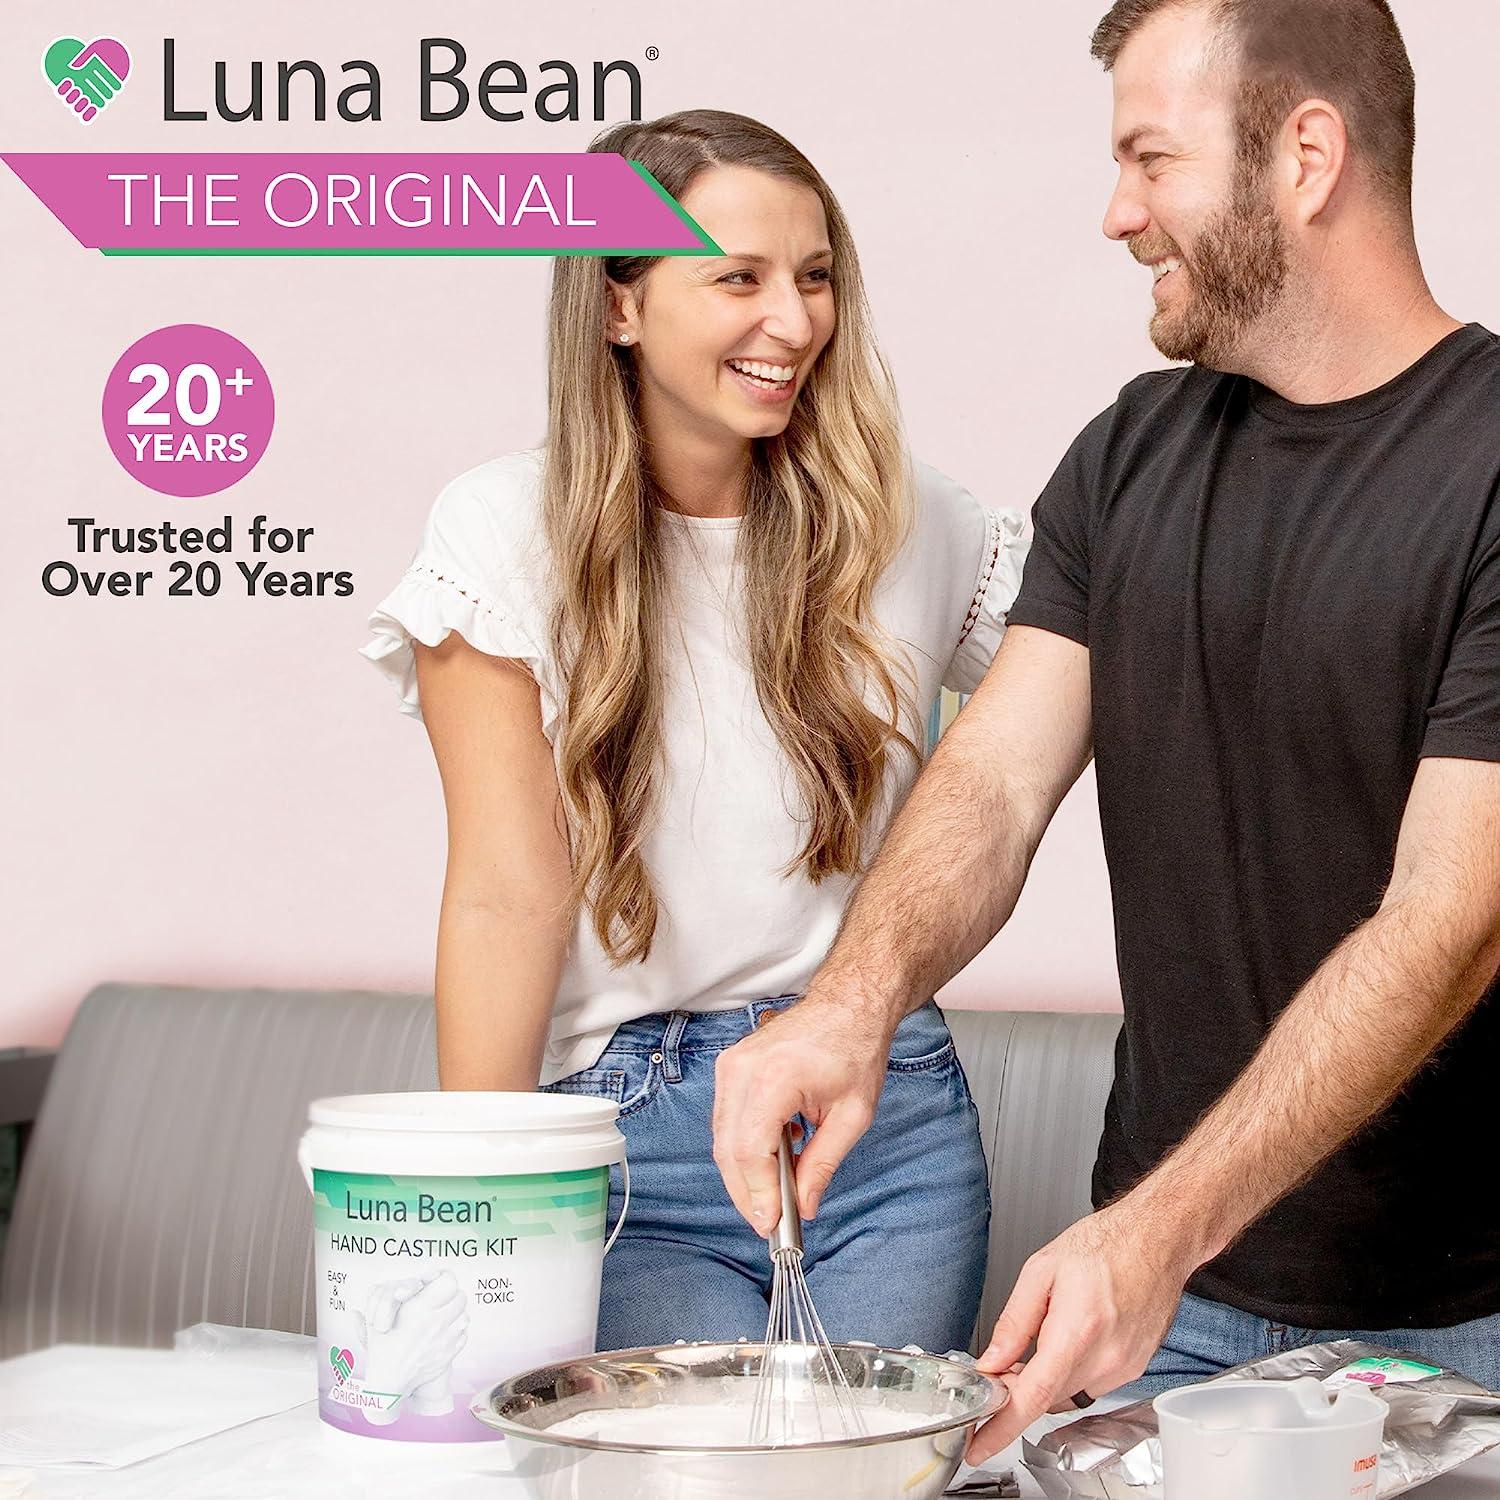 Luna Bean Hand Casting Kit - Unique Couples Gifts for Christmas,  Anniversaries, Bridal Showers, Weddings, Engagements, Grandma - Mold Kit  for Her, Him